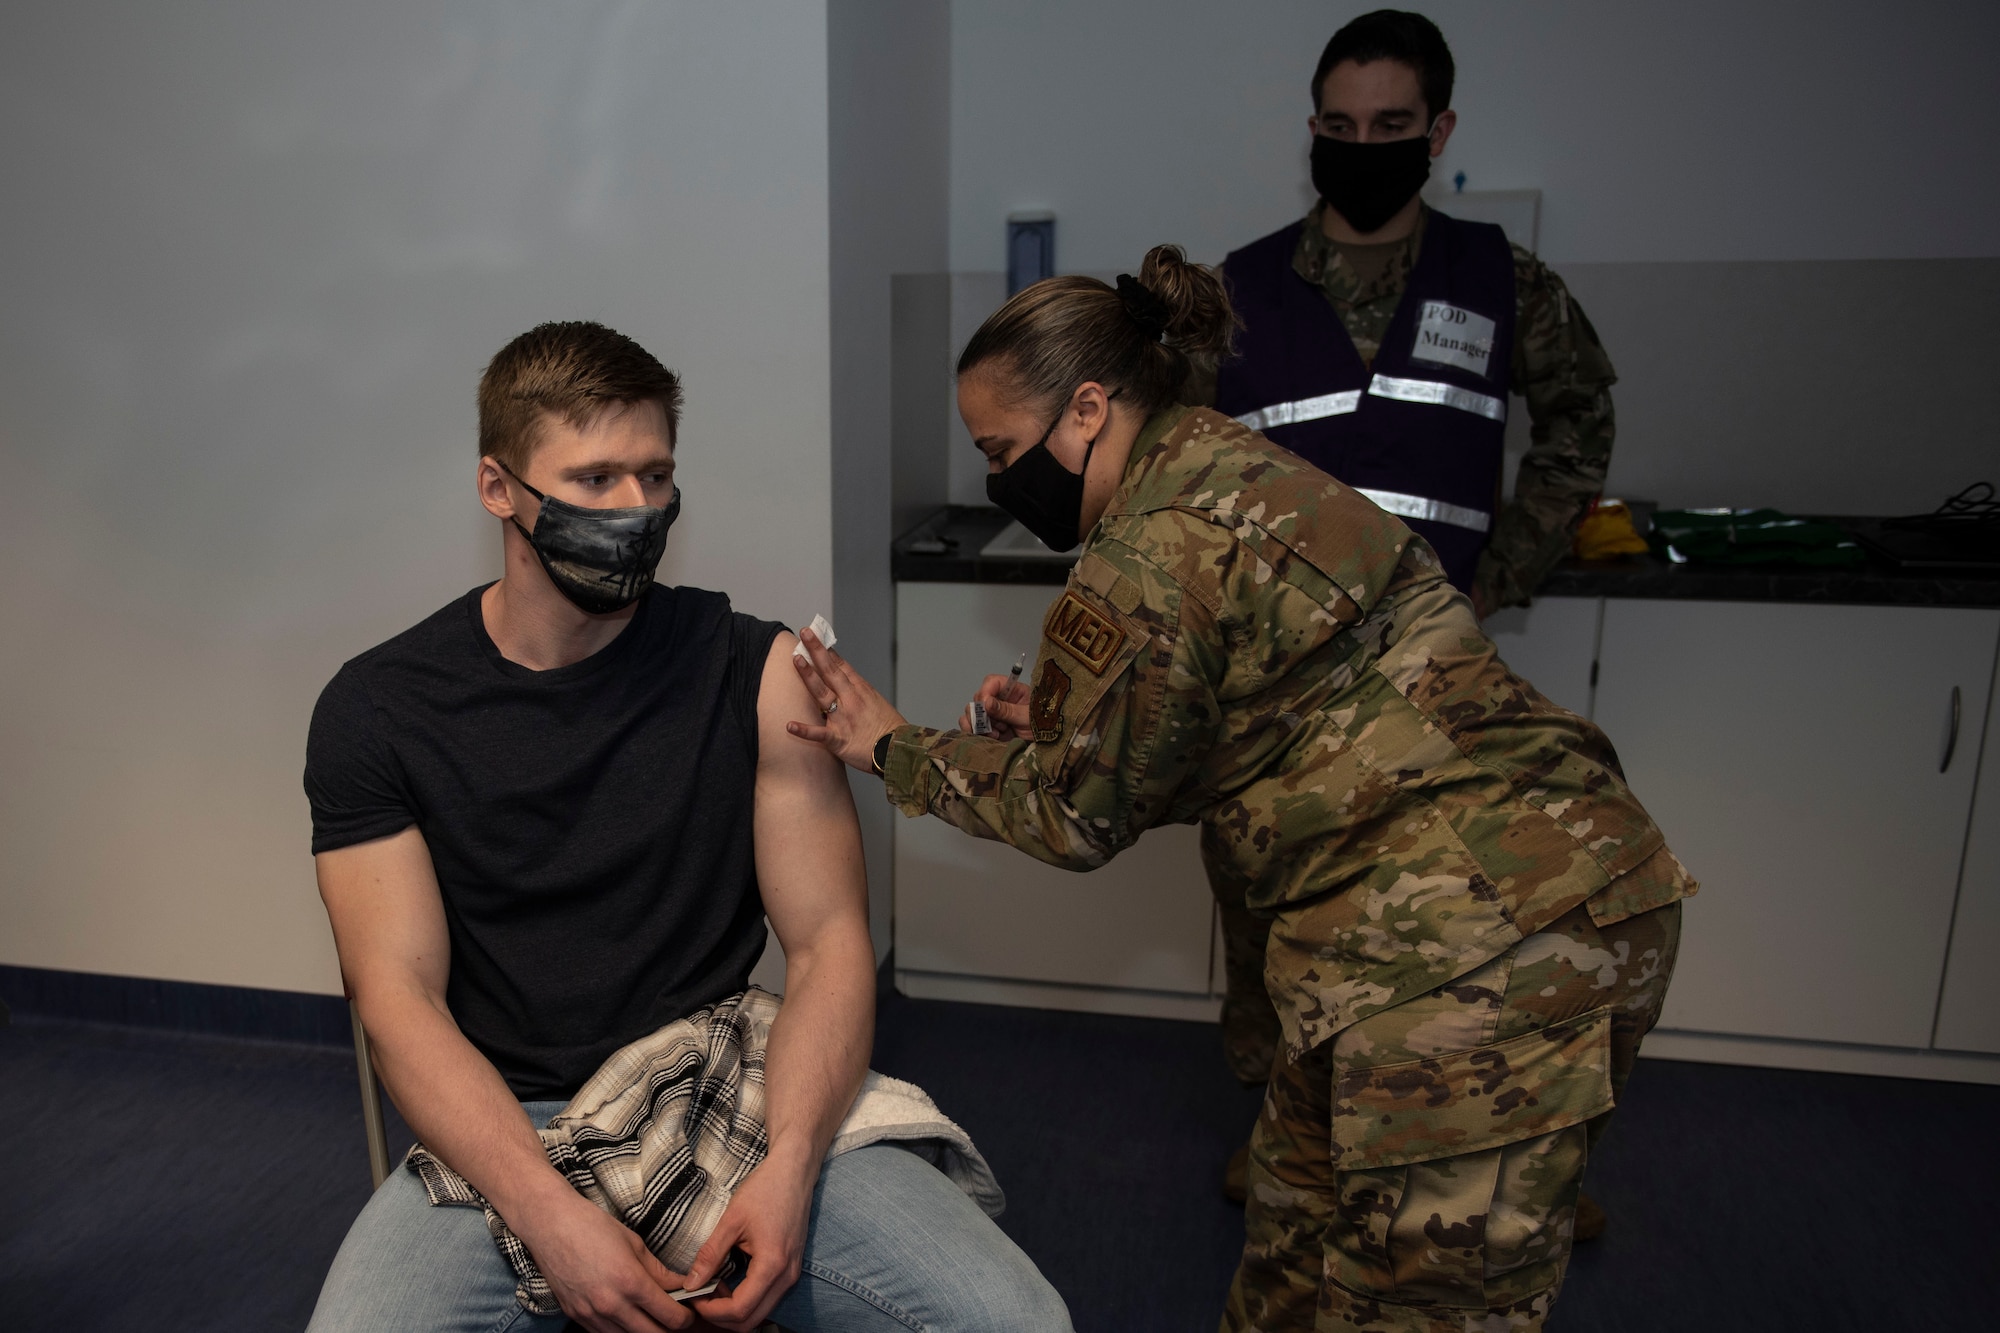 U.S. Air Force Senior Airman Brandon Franklin, 52nd Civil Engineer Squadron Fire and Emergency Services firefighter, receives the COVID-19 vaccine from Tech Sgt. Valeria Feist, 52nd Medical Operations Squadron allergy and immunization technician, Jan. 4, 2021, at Spangdahlem Air Base, Germany. Capt. Matthew Jordan, 52nd Medical Support Squadron chief of pharmacy operations, back, oversaw and hosted the first distribution of COVID-19 vaccinations for 52nd Fighter Wing Airmen, and ensured the process and comfort of service members were a priority. (U.S Air Force photo by Senior Airman Melody W. Howley)